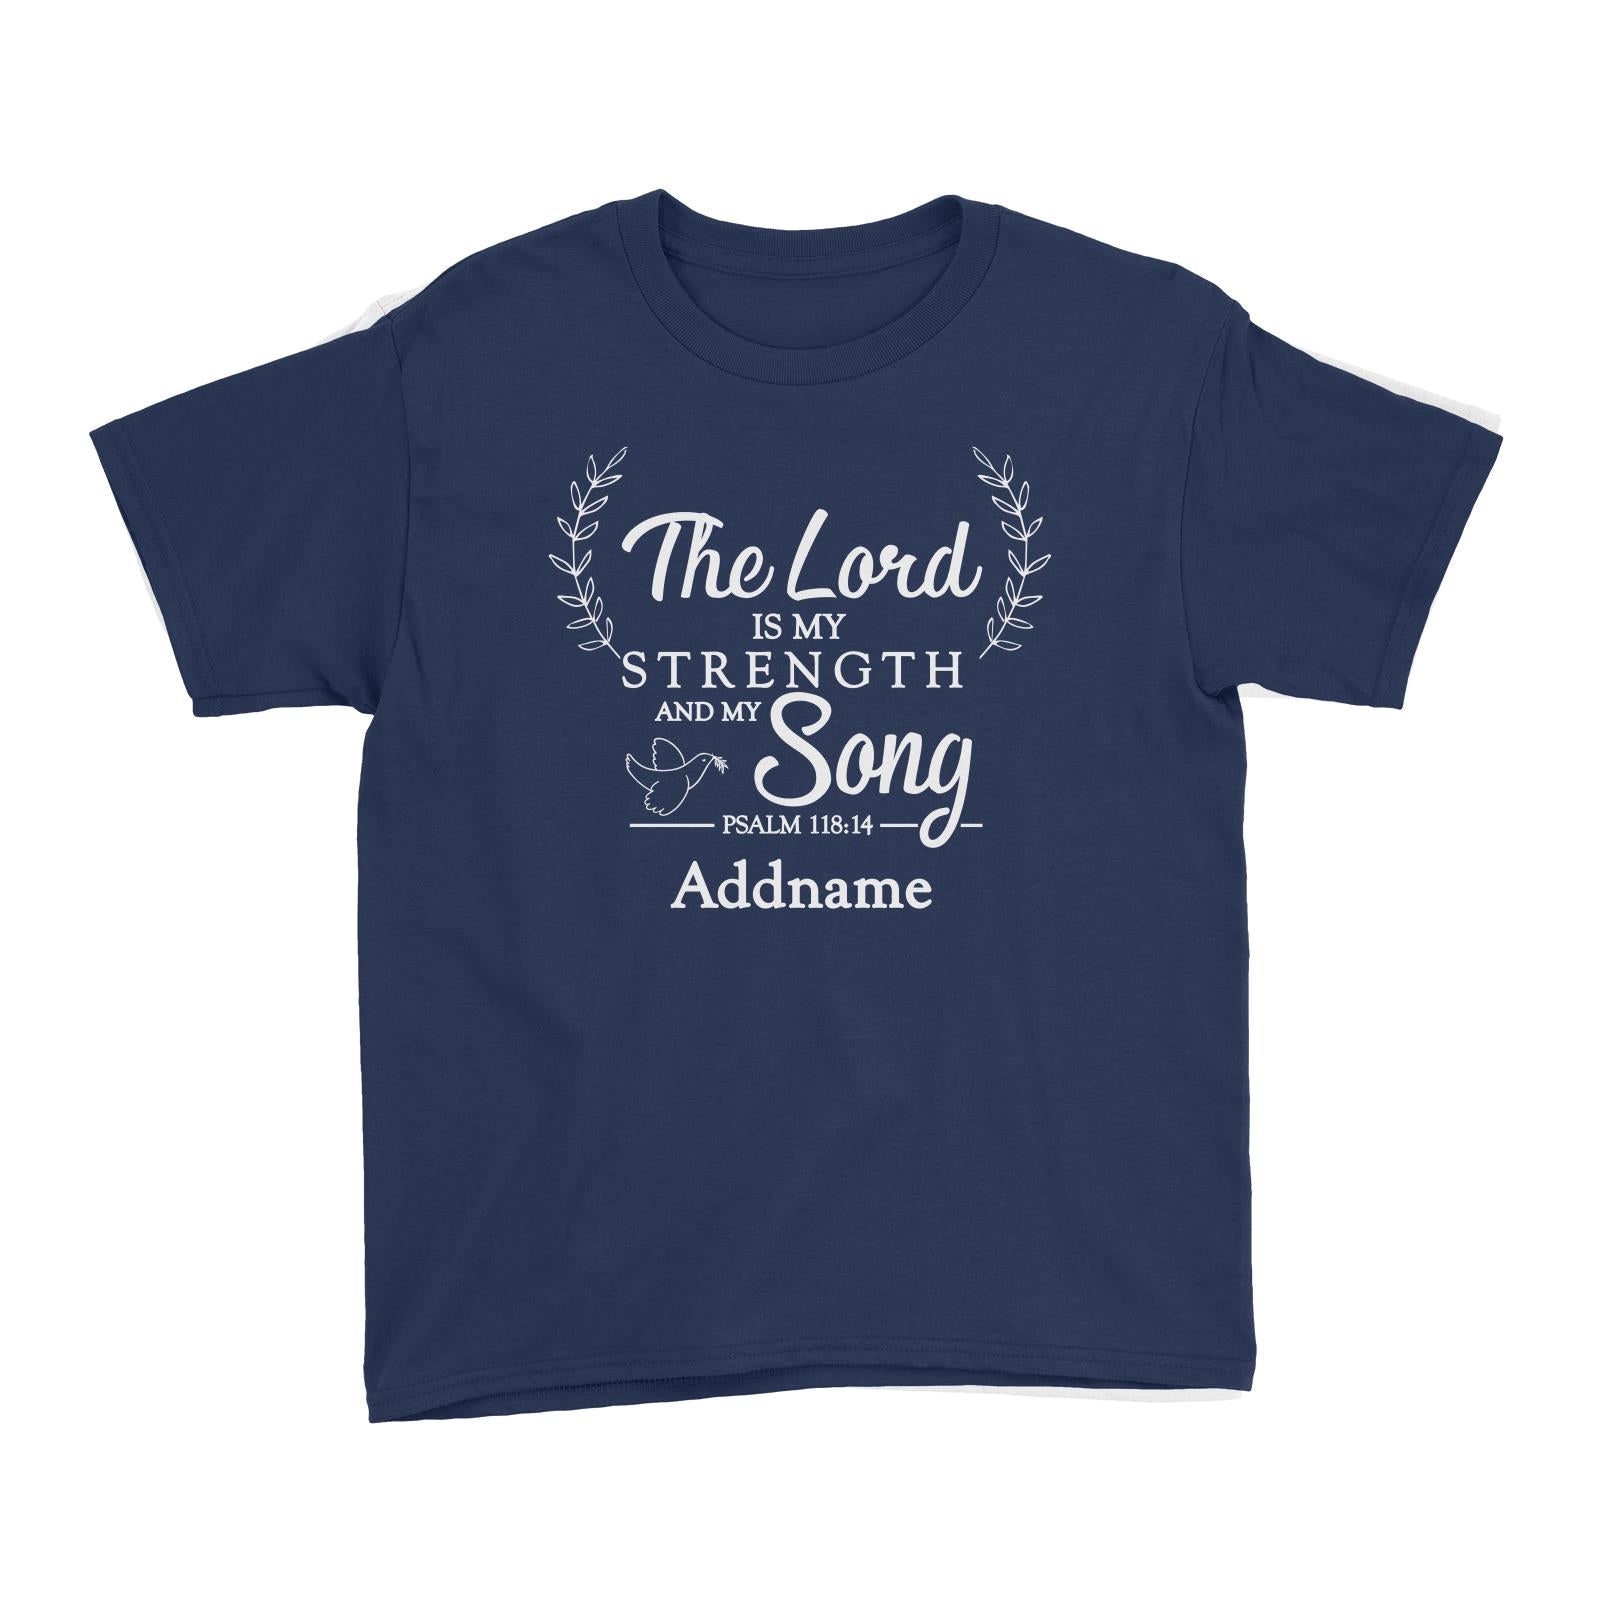 Christian Series The Lord Is My Strength Song Psalm 118.14 Addname Kid's T-Shirt